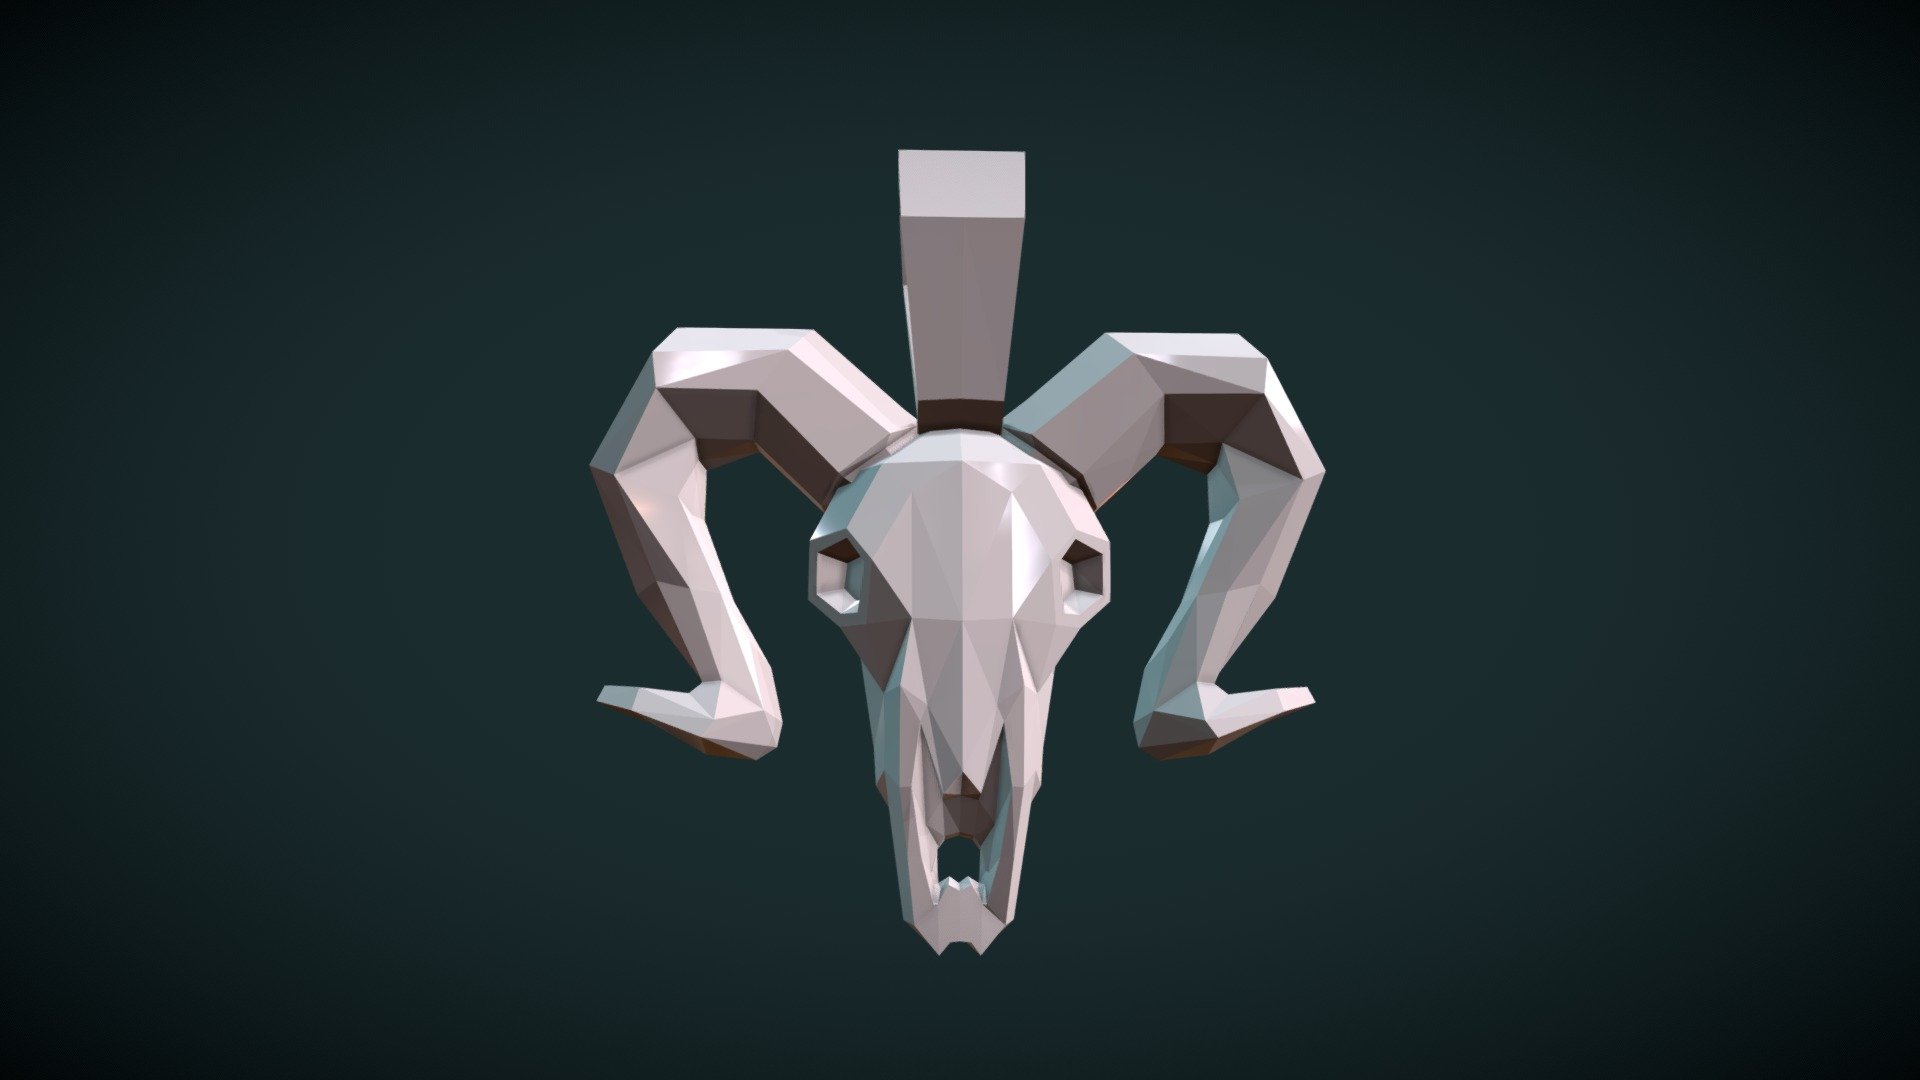 Print ready, low poly goat head.

Measure units are millimeters, the figure is about 3.5 cm in width.

For the hollow version there is about 1 mm for wall thickness.

Mesh is manifold, no holes, no inverted faces, no bad contiguous edges.

The bail is a separate object, with it it can be used as pendant.

Available formats: .blend, .stl, .obj, .fbx, .dae

Here is two versions of the model:

1) Goat_LP_sld. (blend, .obj, .fbx, .dae. stl) This files contain solid version of the model. The model consists of 668 triangular faces.

2) Goat_LP_hlw. (blend, .obj, .fbx, .dae. stl) Here is hollow version of the model. The model consists of 13854 triangular faces.

For .stl the goat head and the bail are available as separate files - Goat Head LP - Buy Royalty Free 3D model by Skazok 3d model